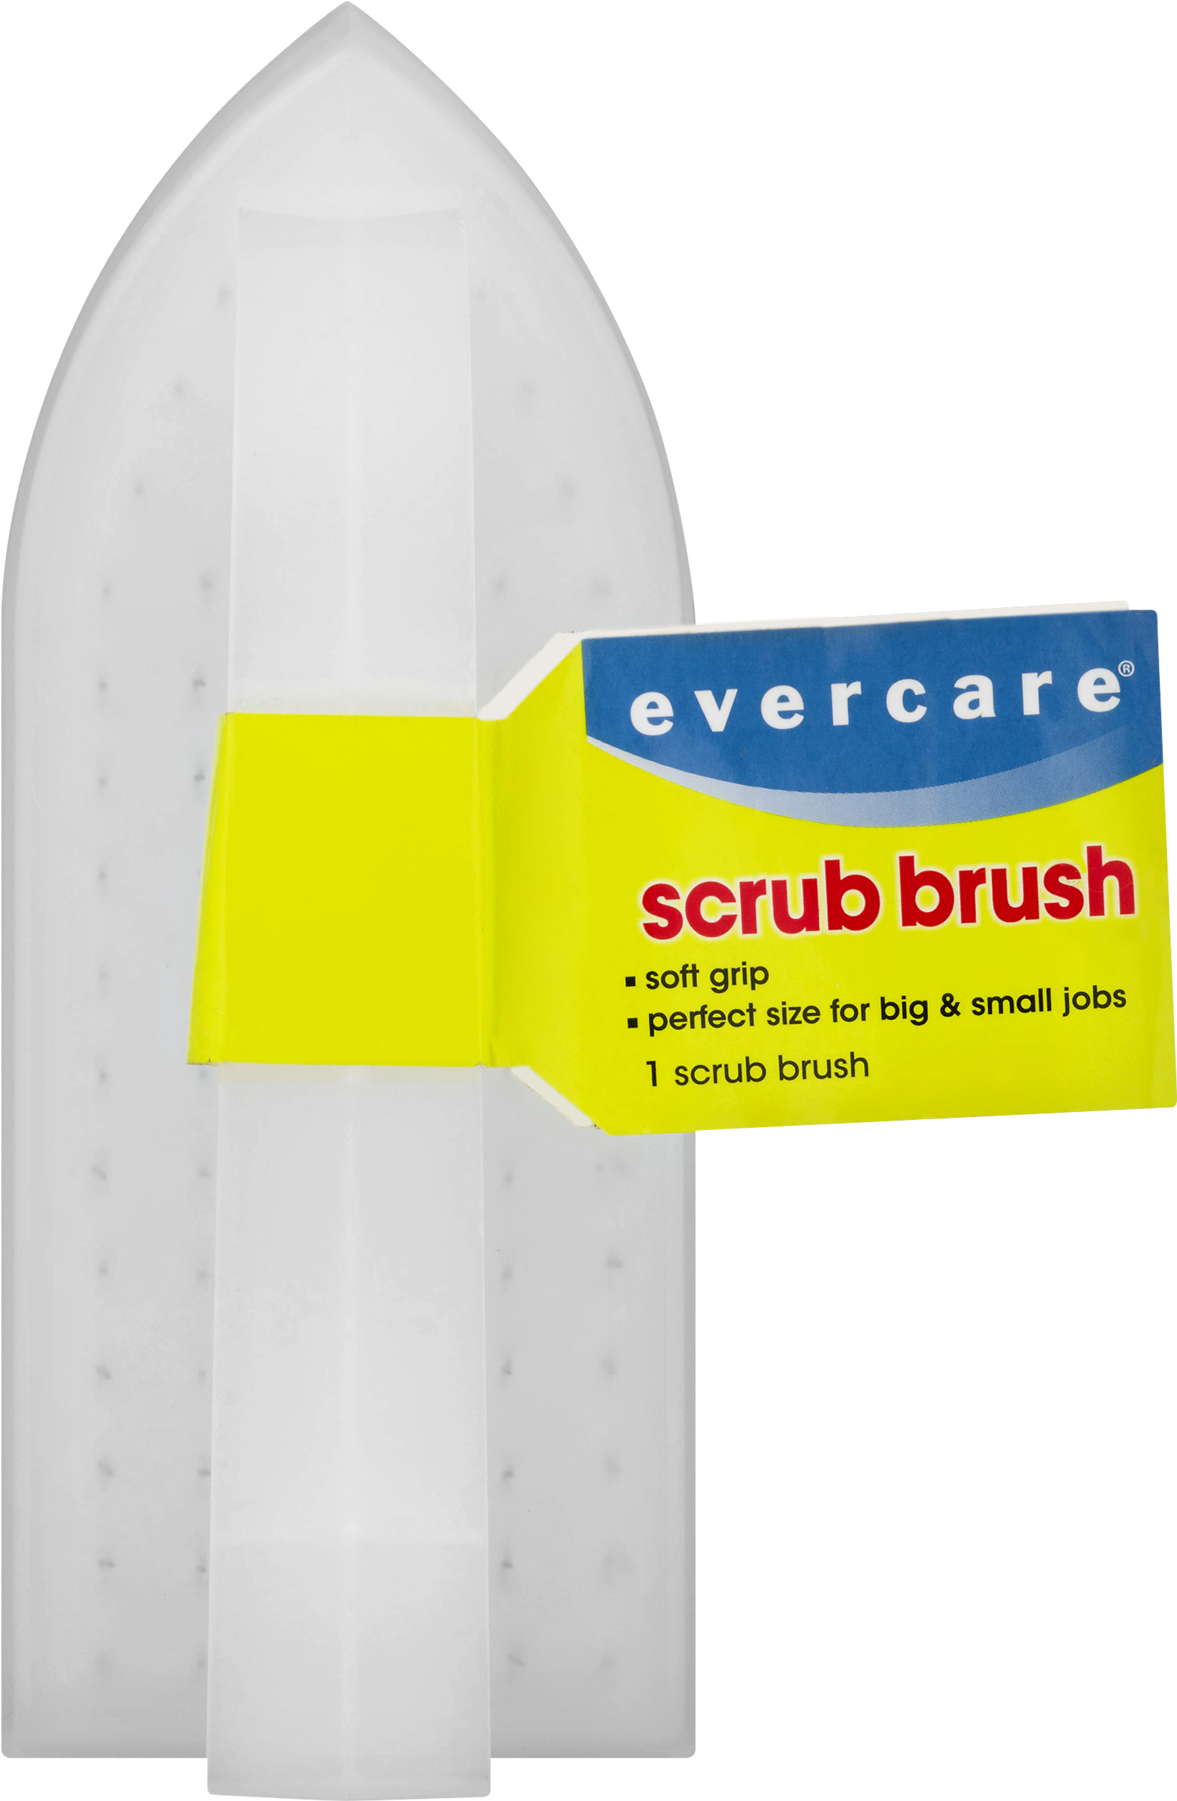 Evercare Scrub Brush 1 0 Ct Best Cleaning Tools - Label (1800x1800)